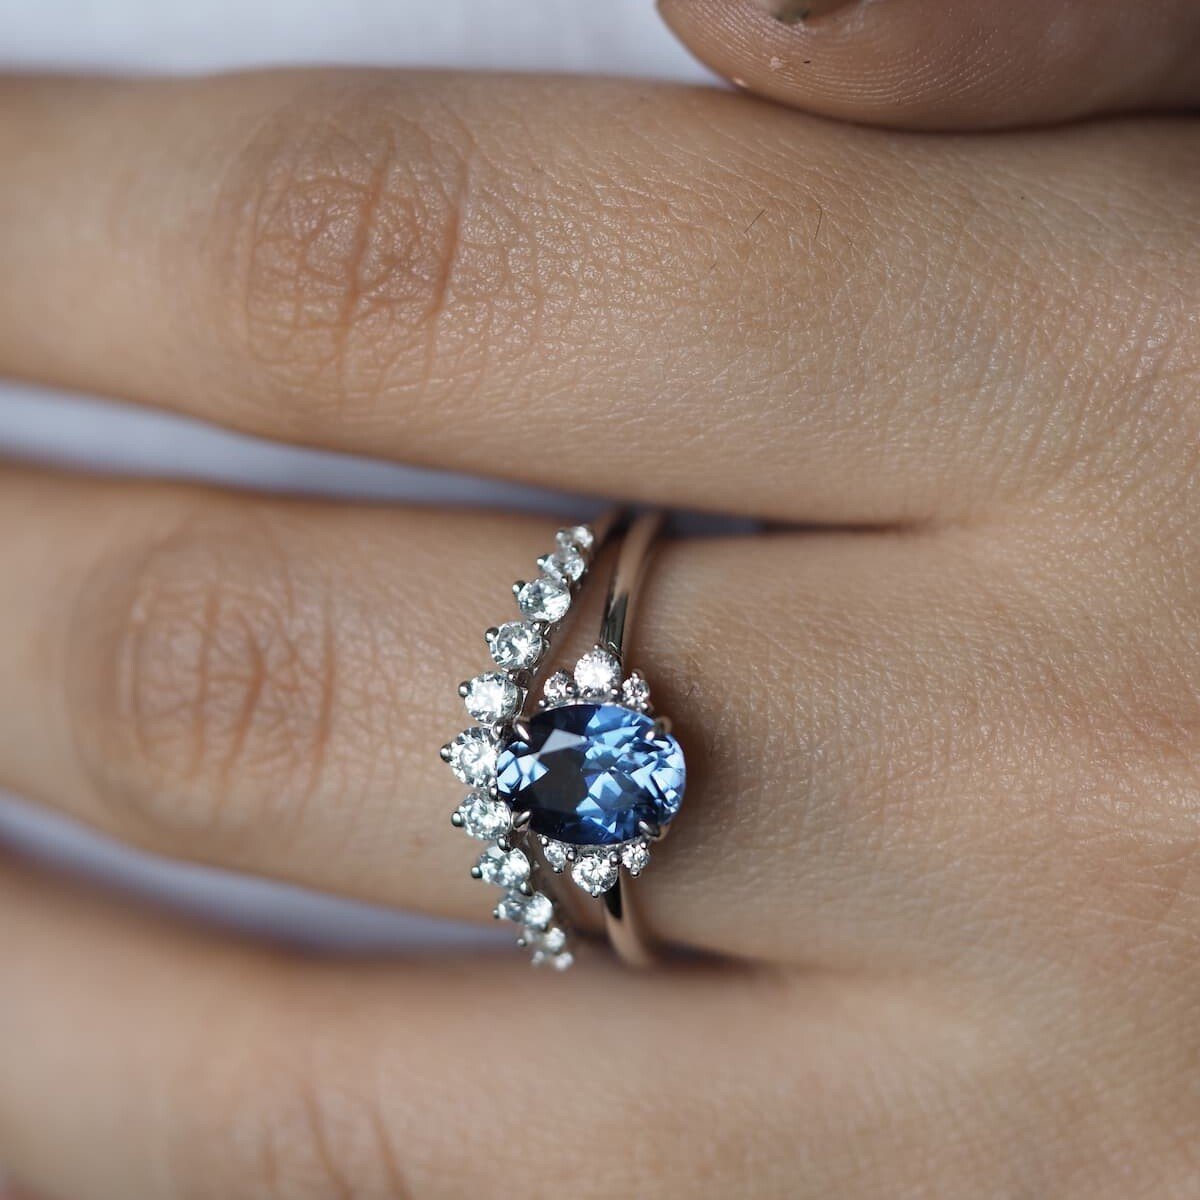 Sophia Blue Sapphire Ring shown on a hand model. With diamond band.